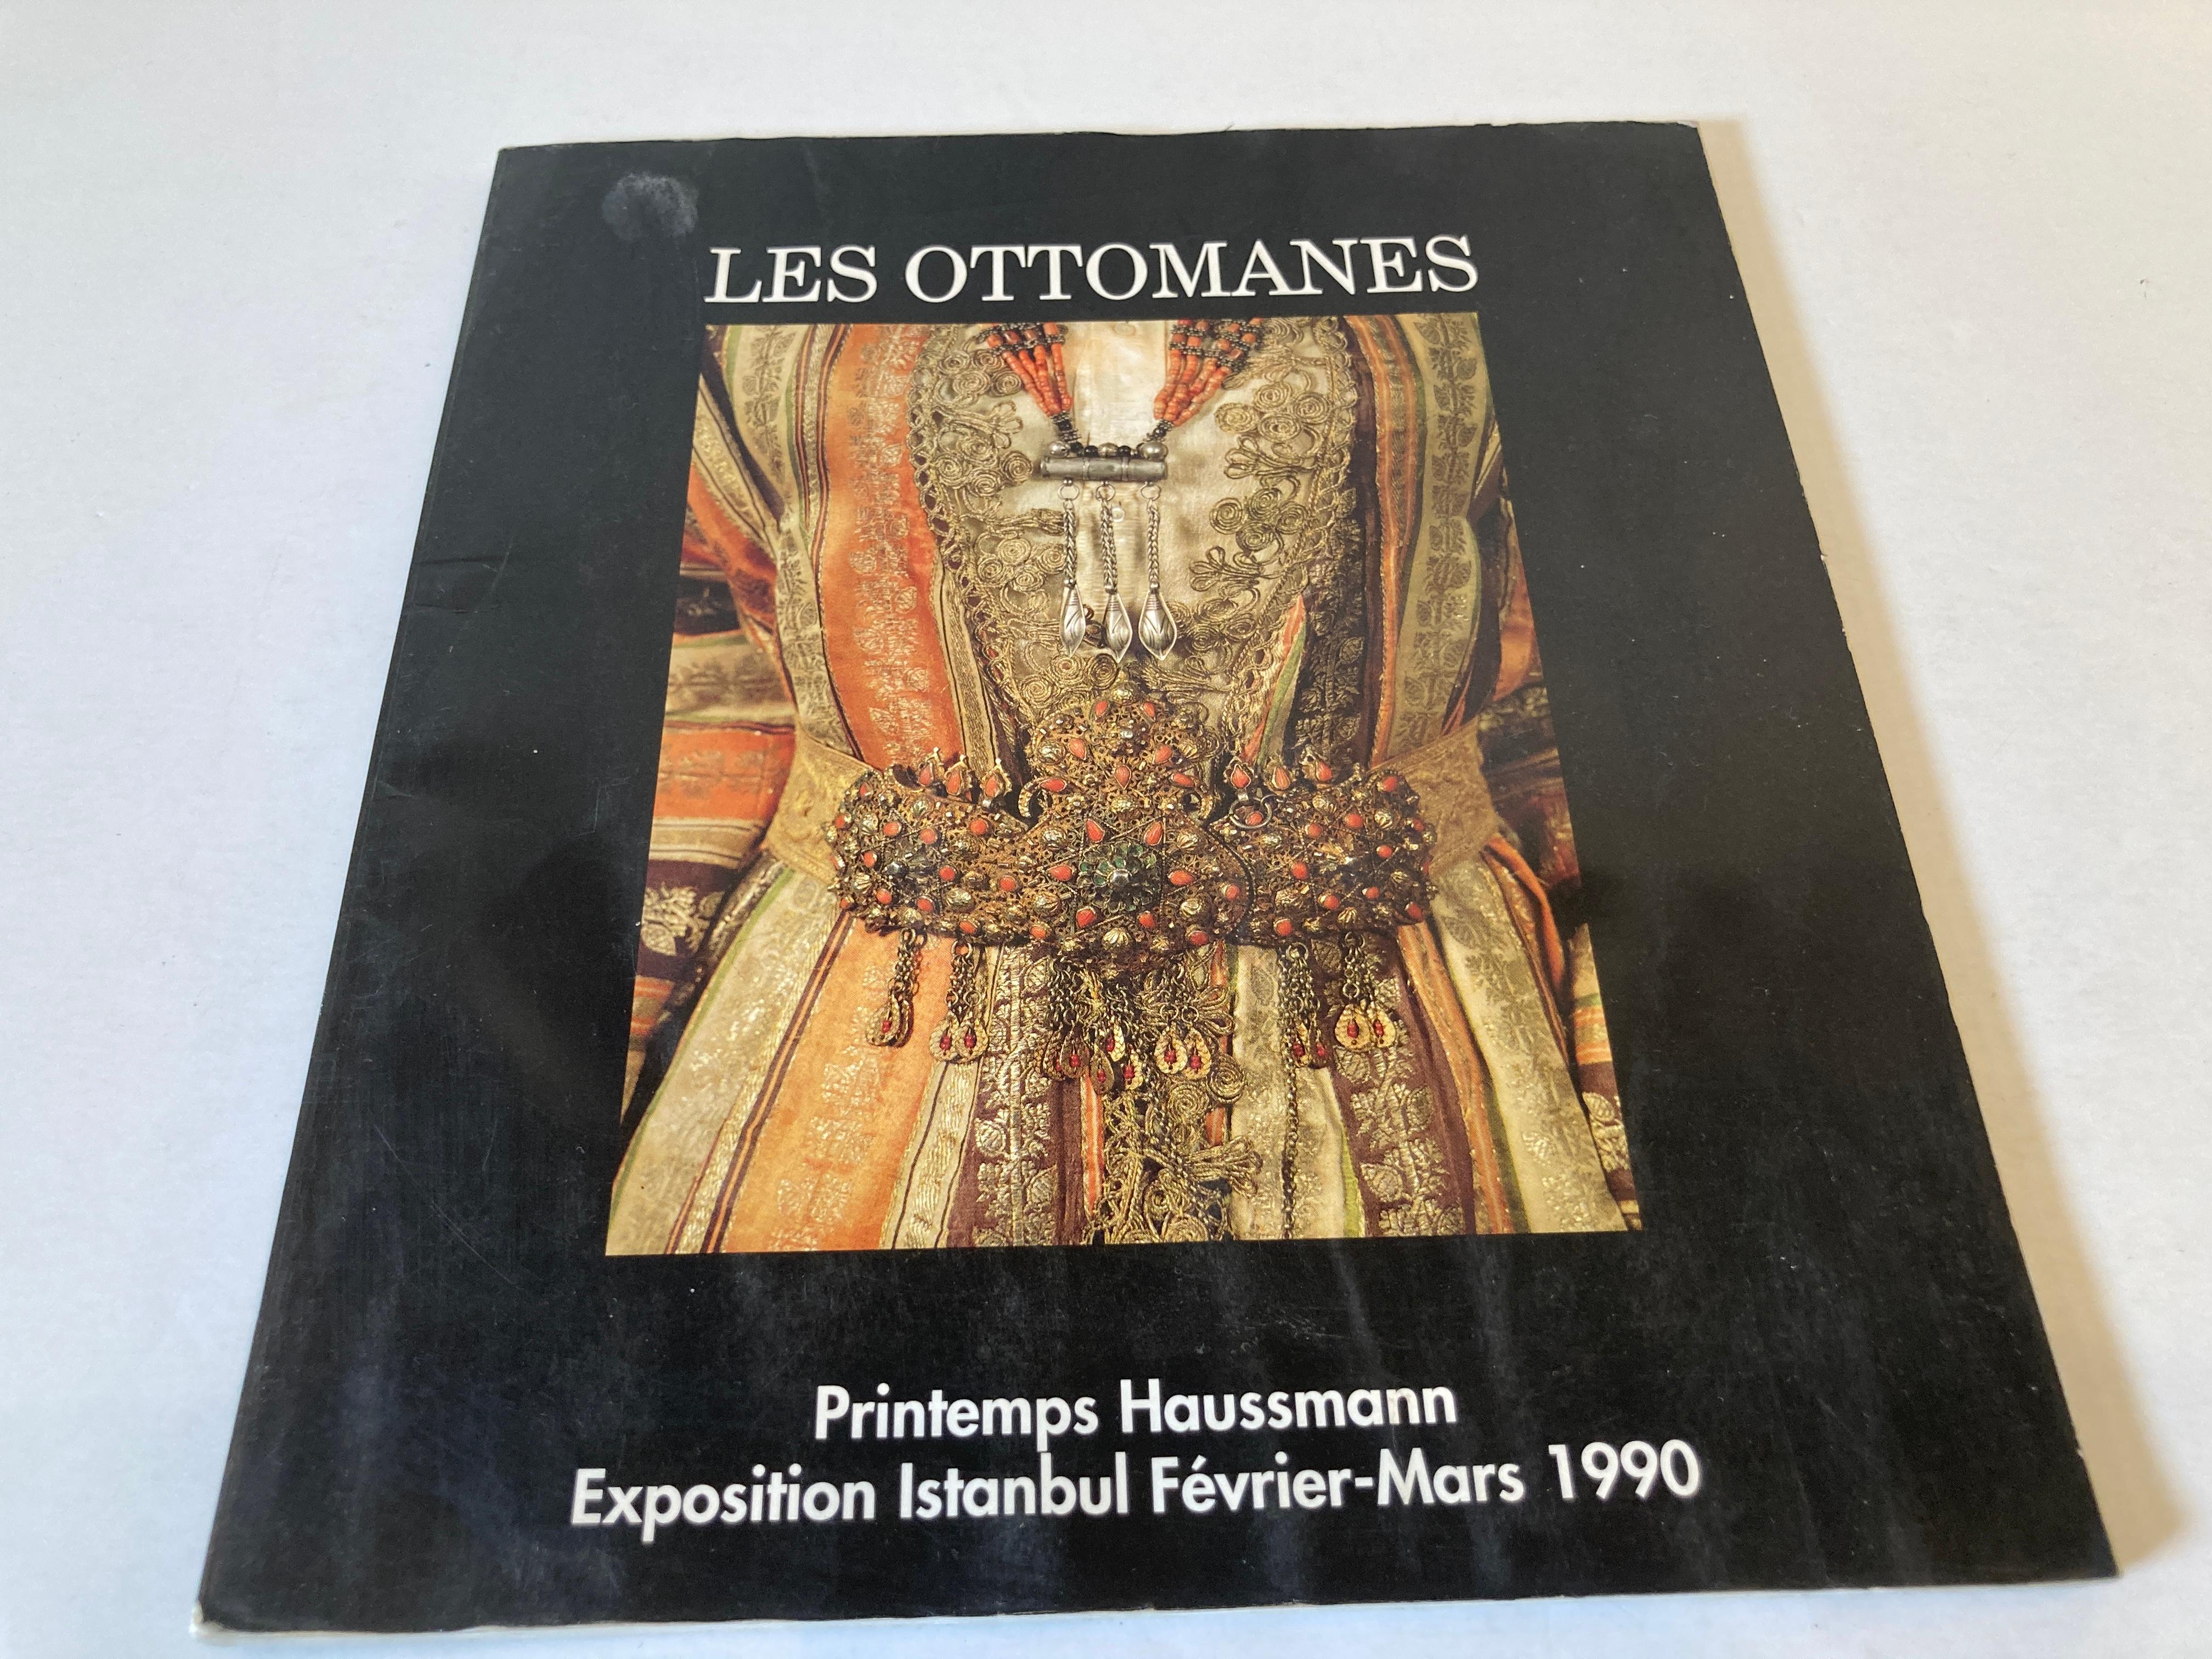 Les Ottomanes Printemps Haussman Paris Istanbul Exposition 1990.
By Teresa Battesti maitre de conference.
French Text.
Great references for costumes and textiles of the Ottoman empire.
 